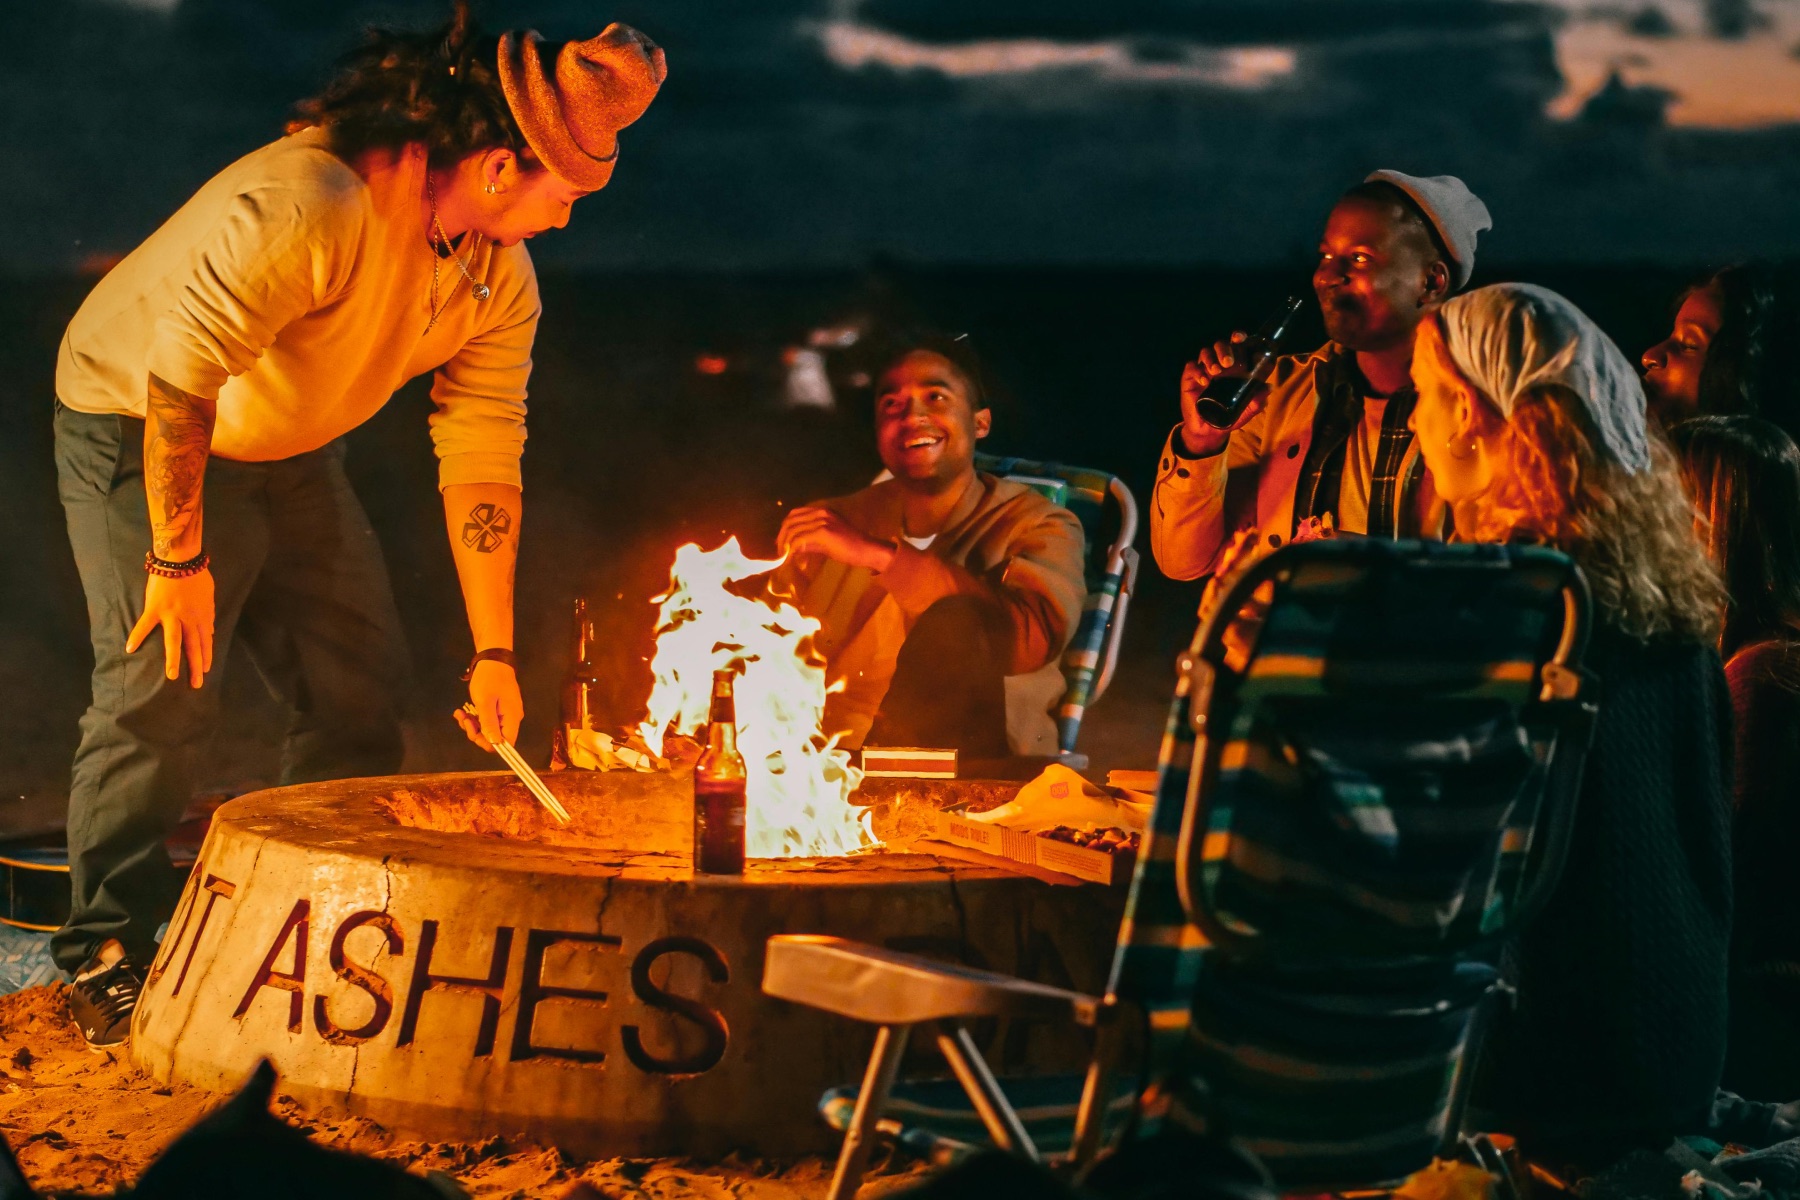 A group of friends in their 30s gather around a bonfire on a beach, smiling and drinking beer